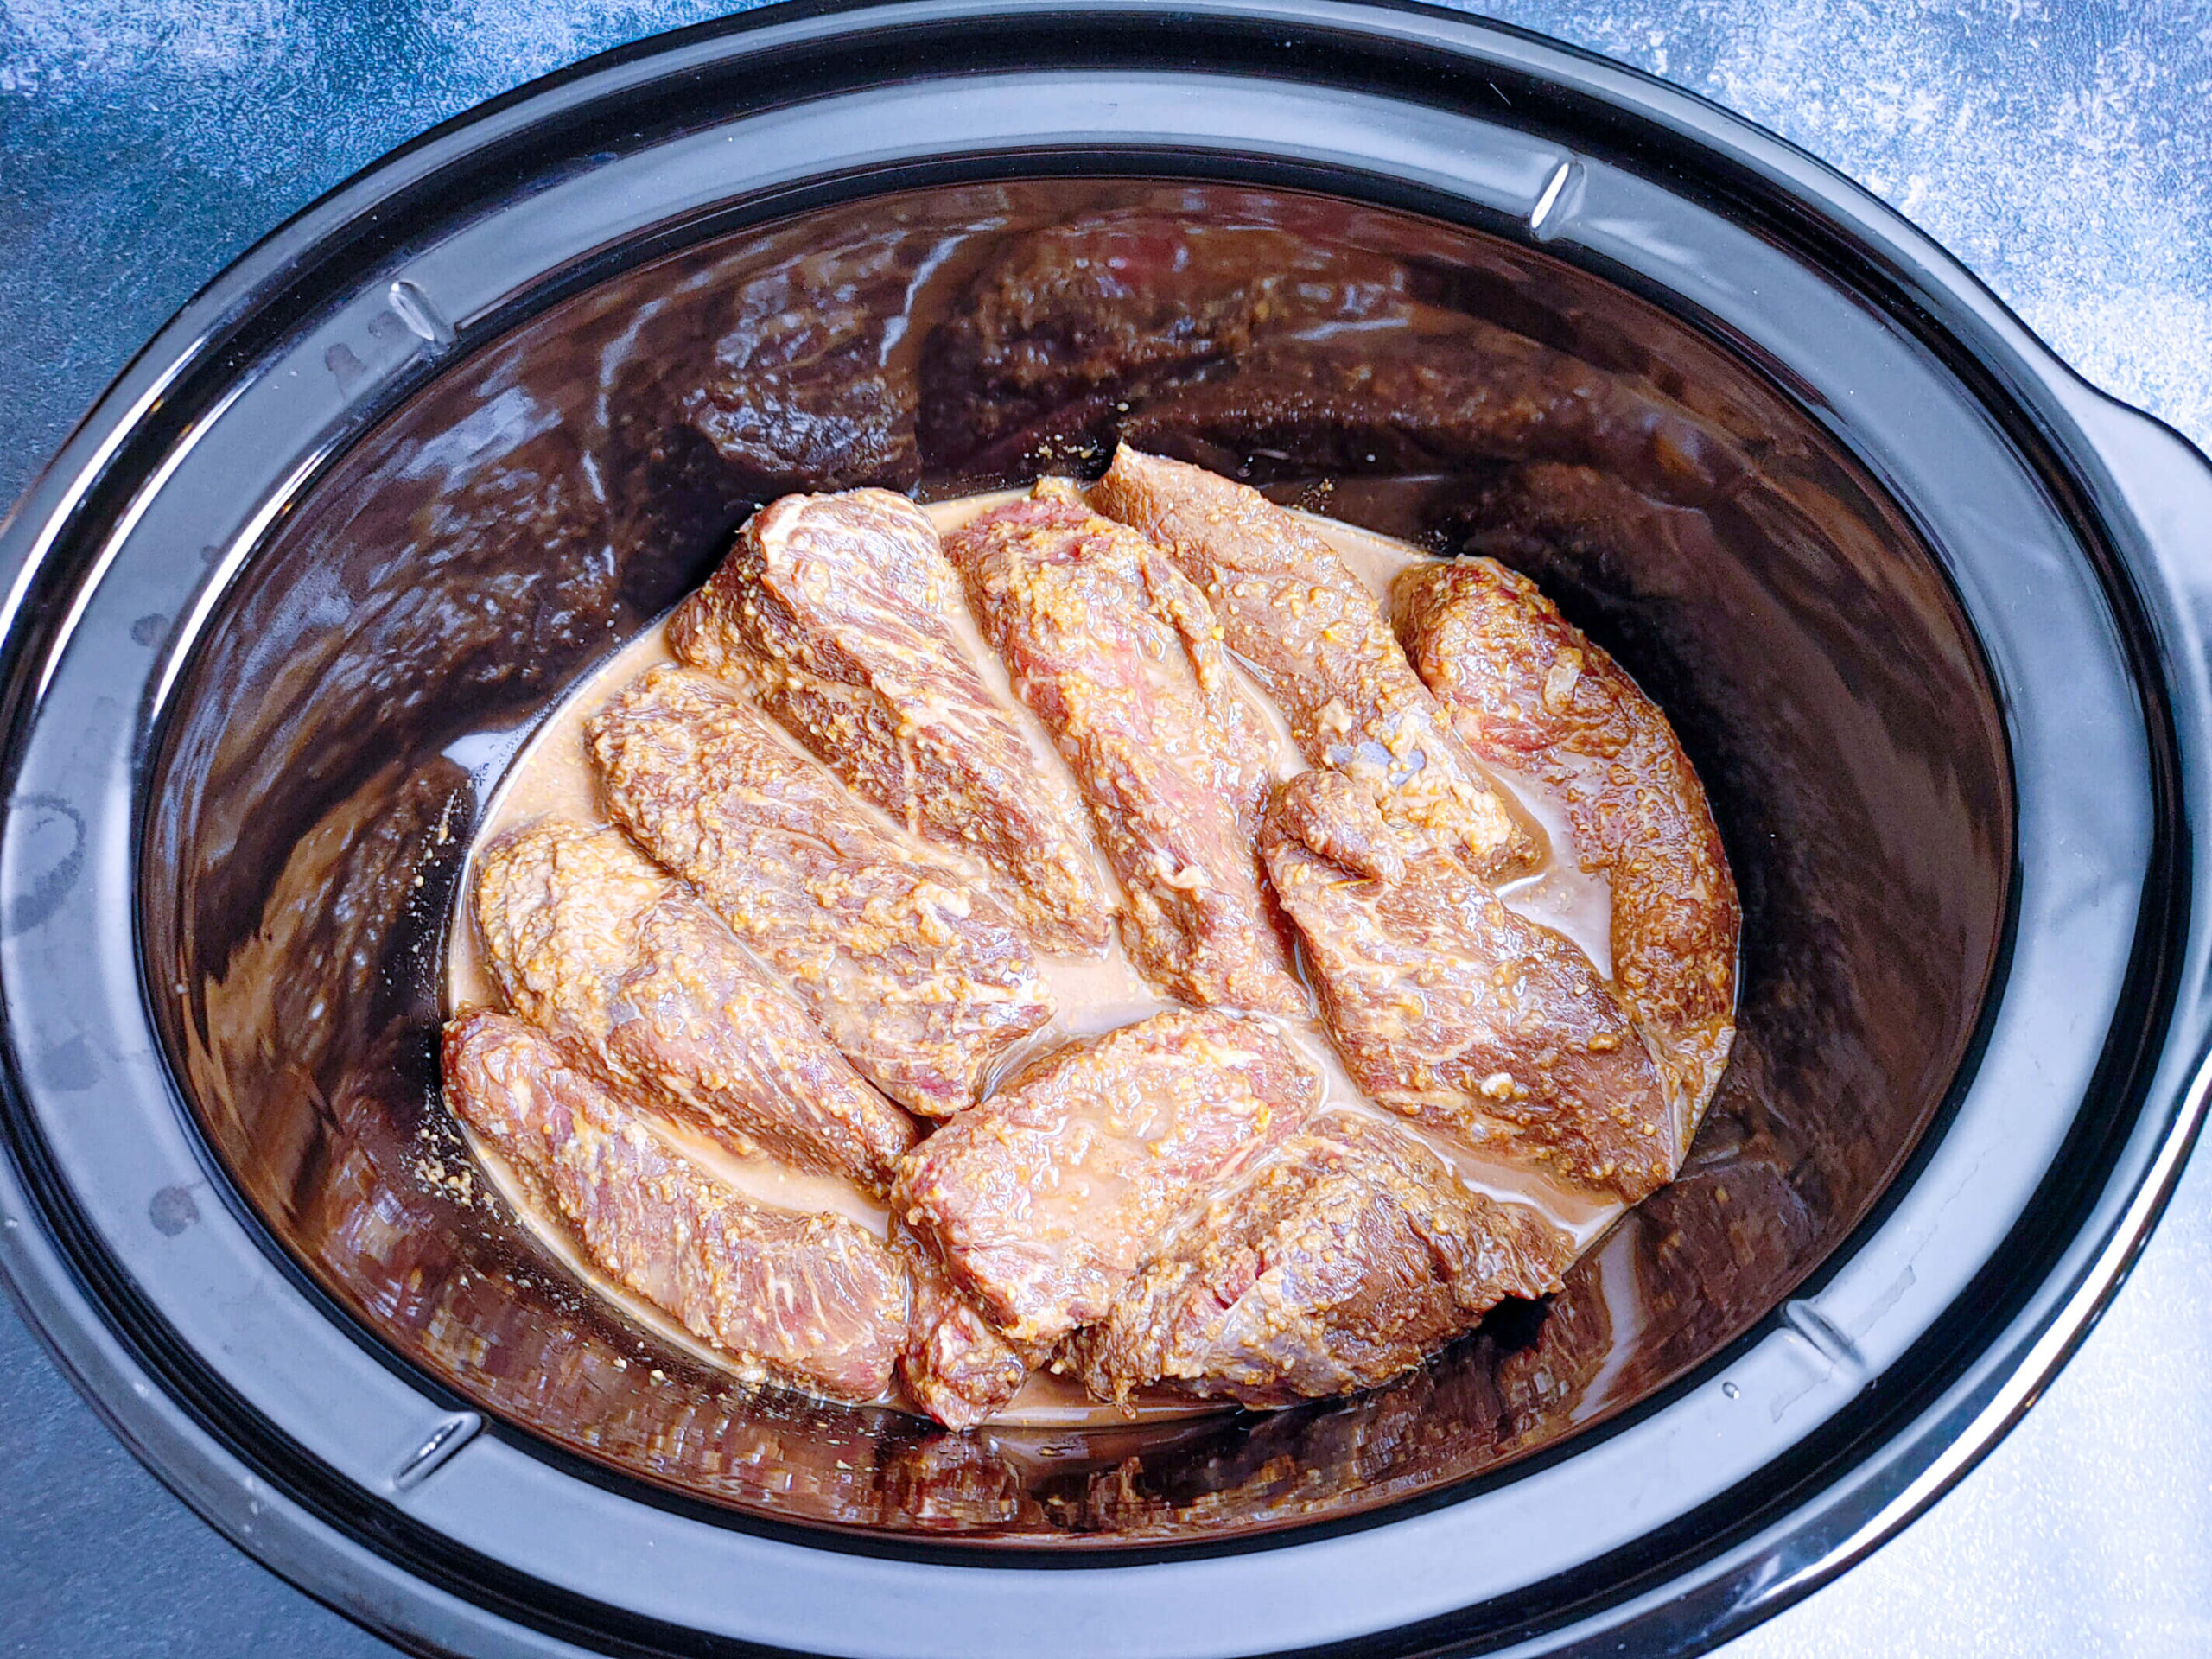 ADDING RIBS TO THE SLOW COOKER